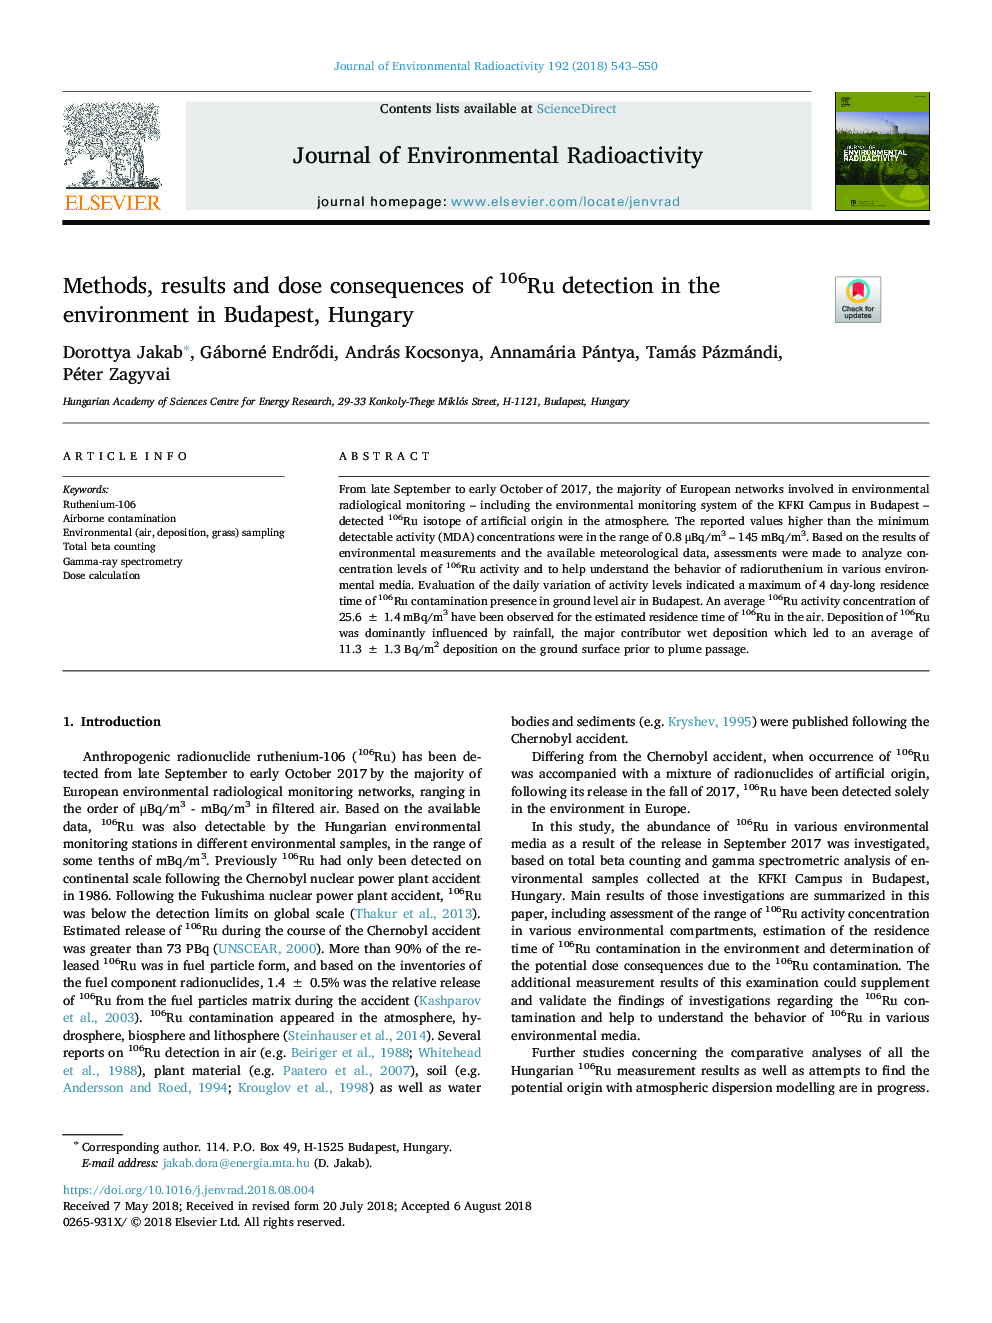 Methods, results and dose consequences of 106Ru detection in the environment in Budapest, Hungary